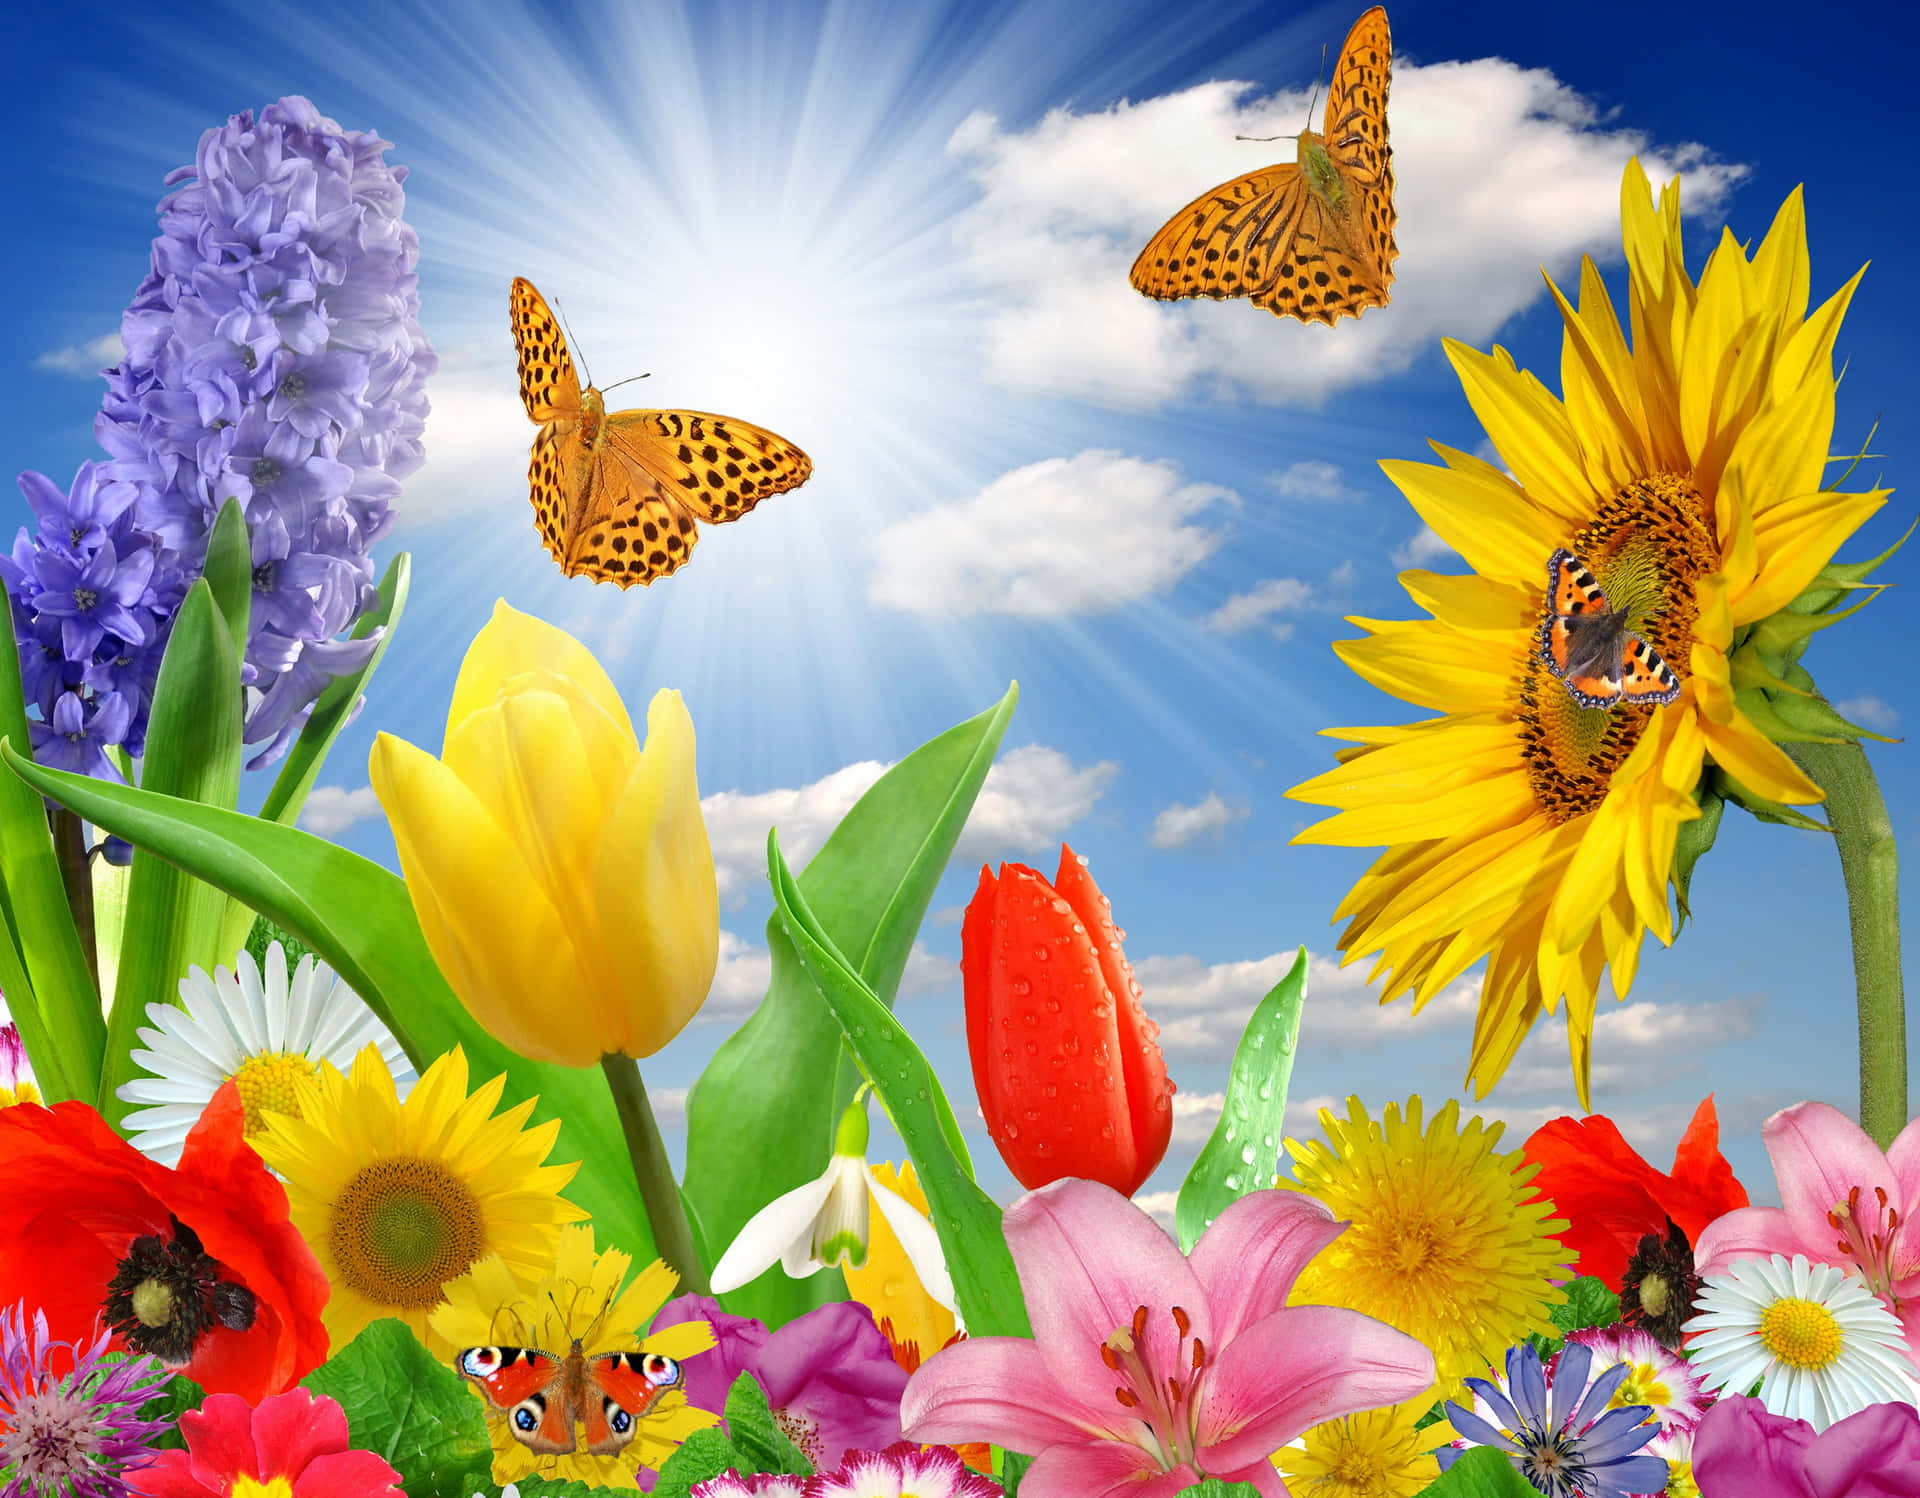 Vibrant Spring Butterflies on Colorful Blooms Wallpaper